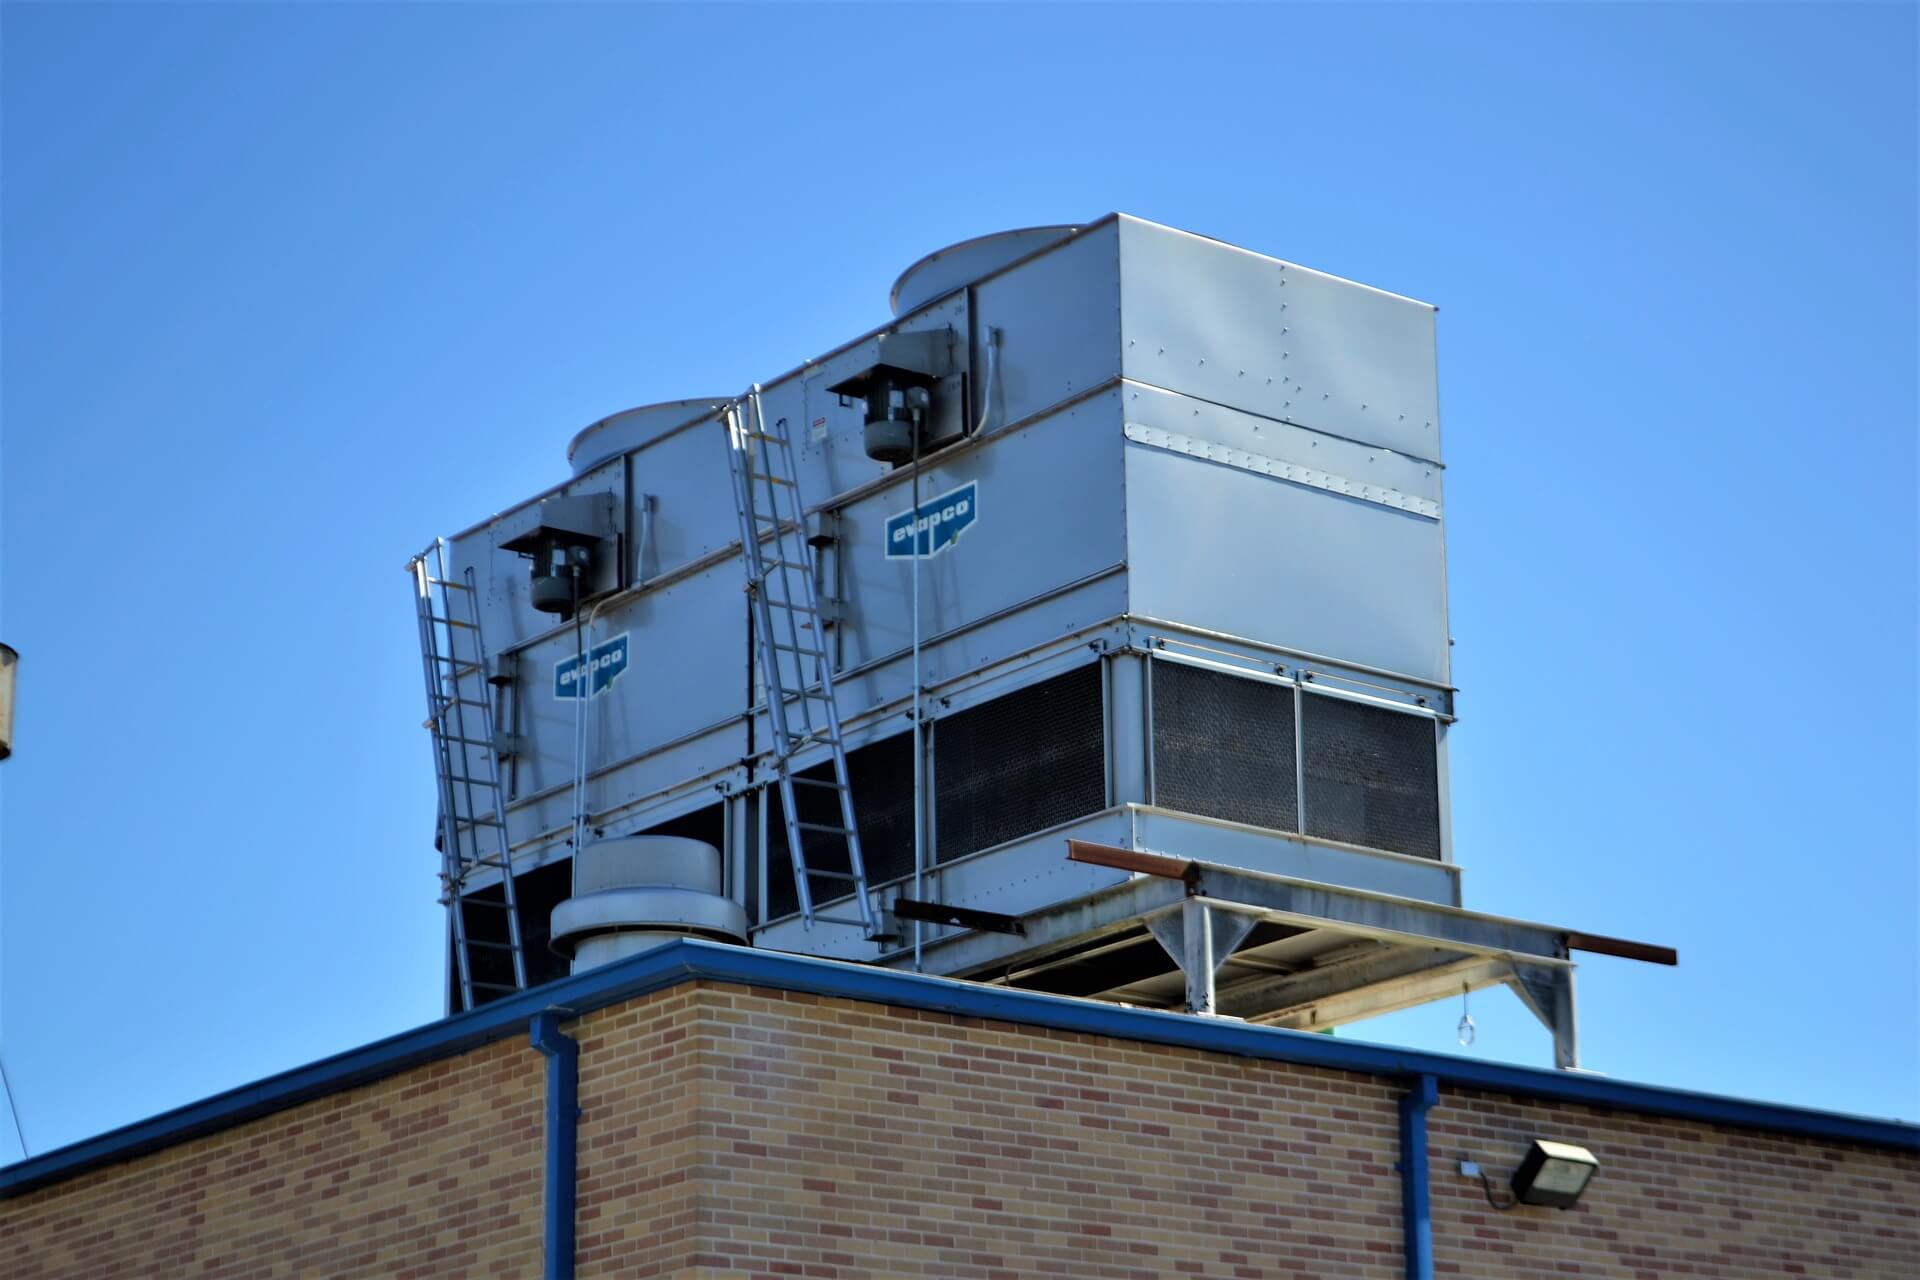 Stock HVAC Air conditioning and central air equipment on top of building.